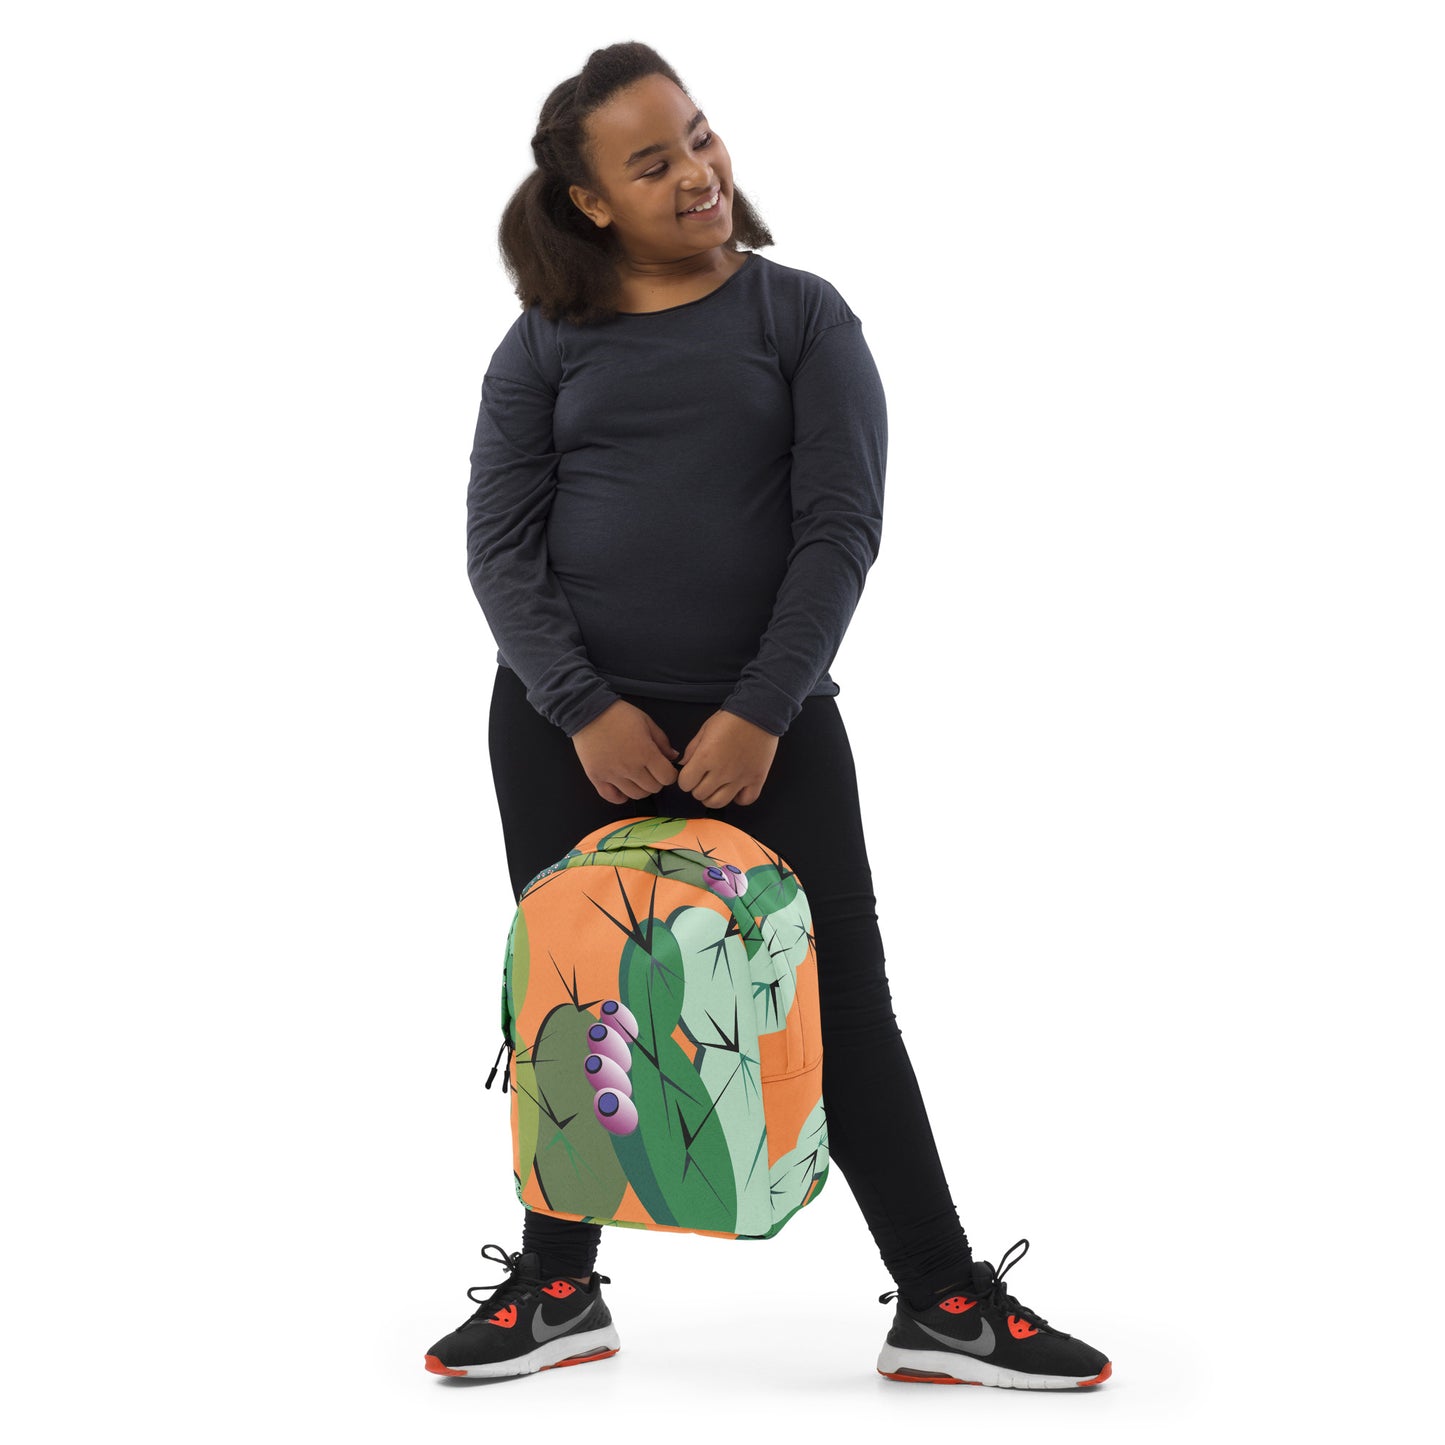 Cactus Party Minimalist Backpack